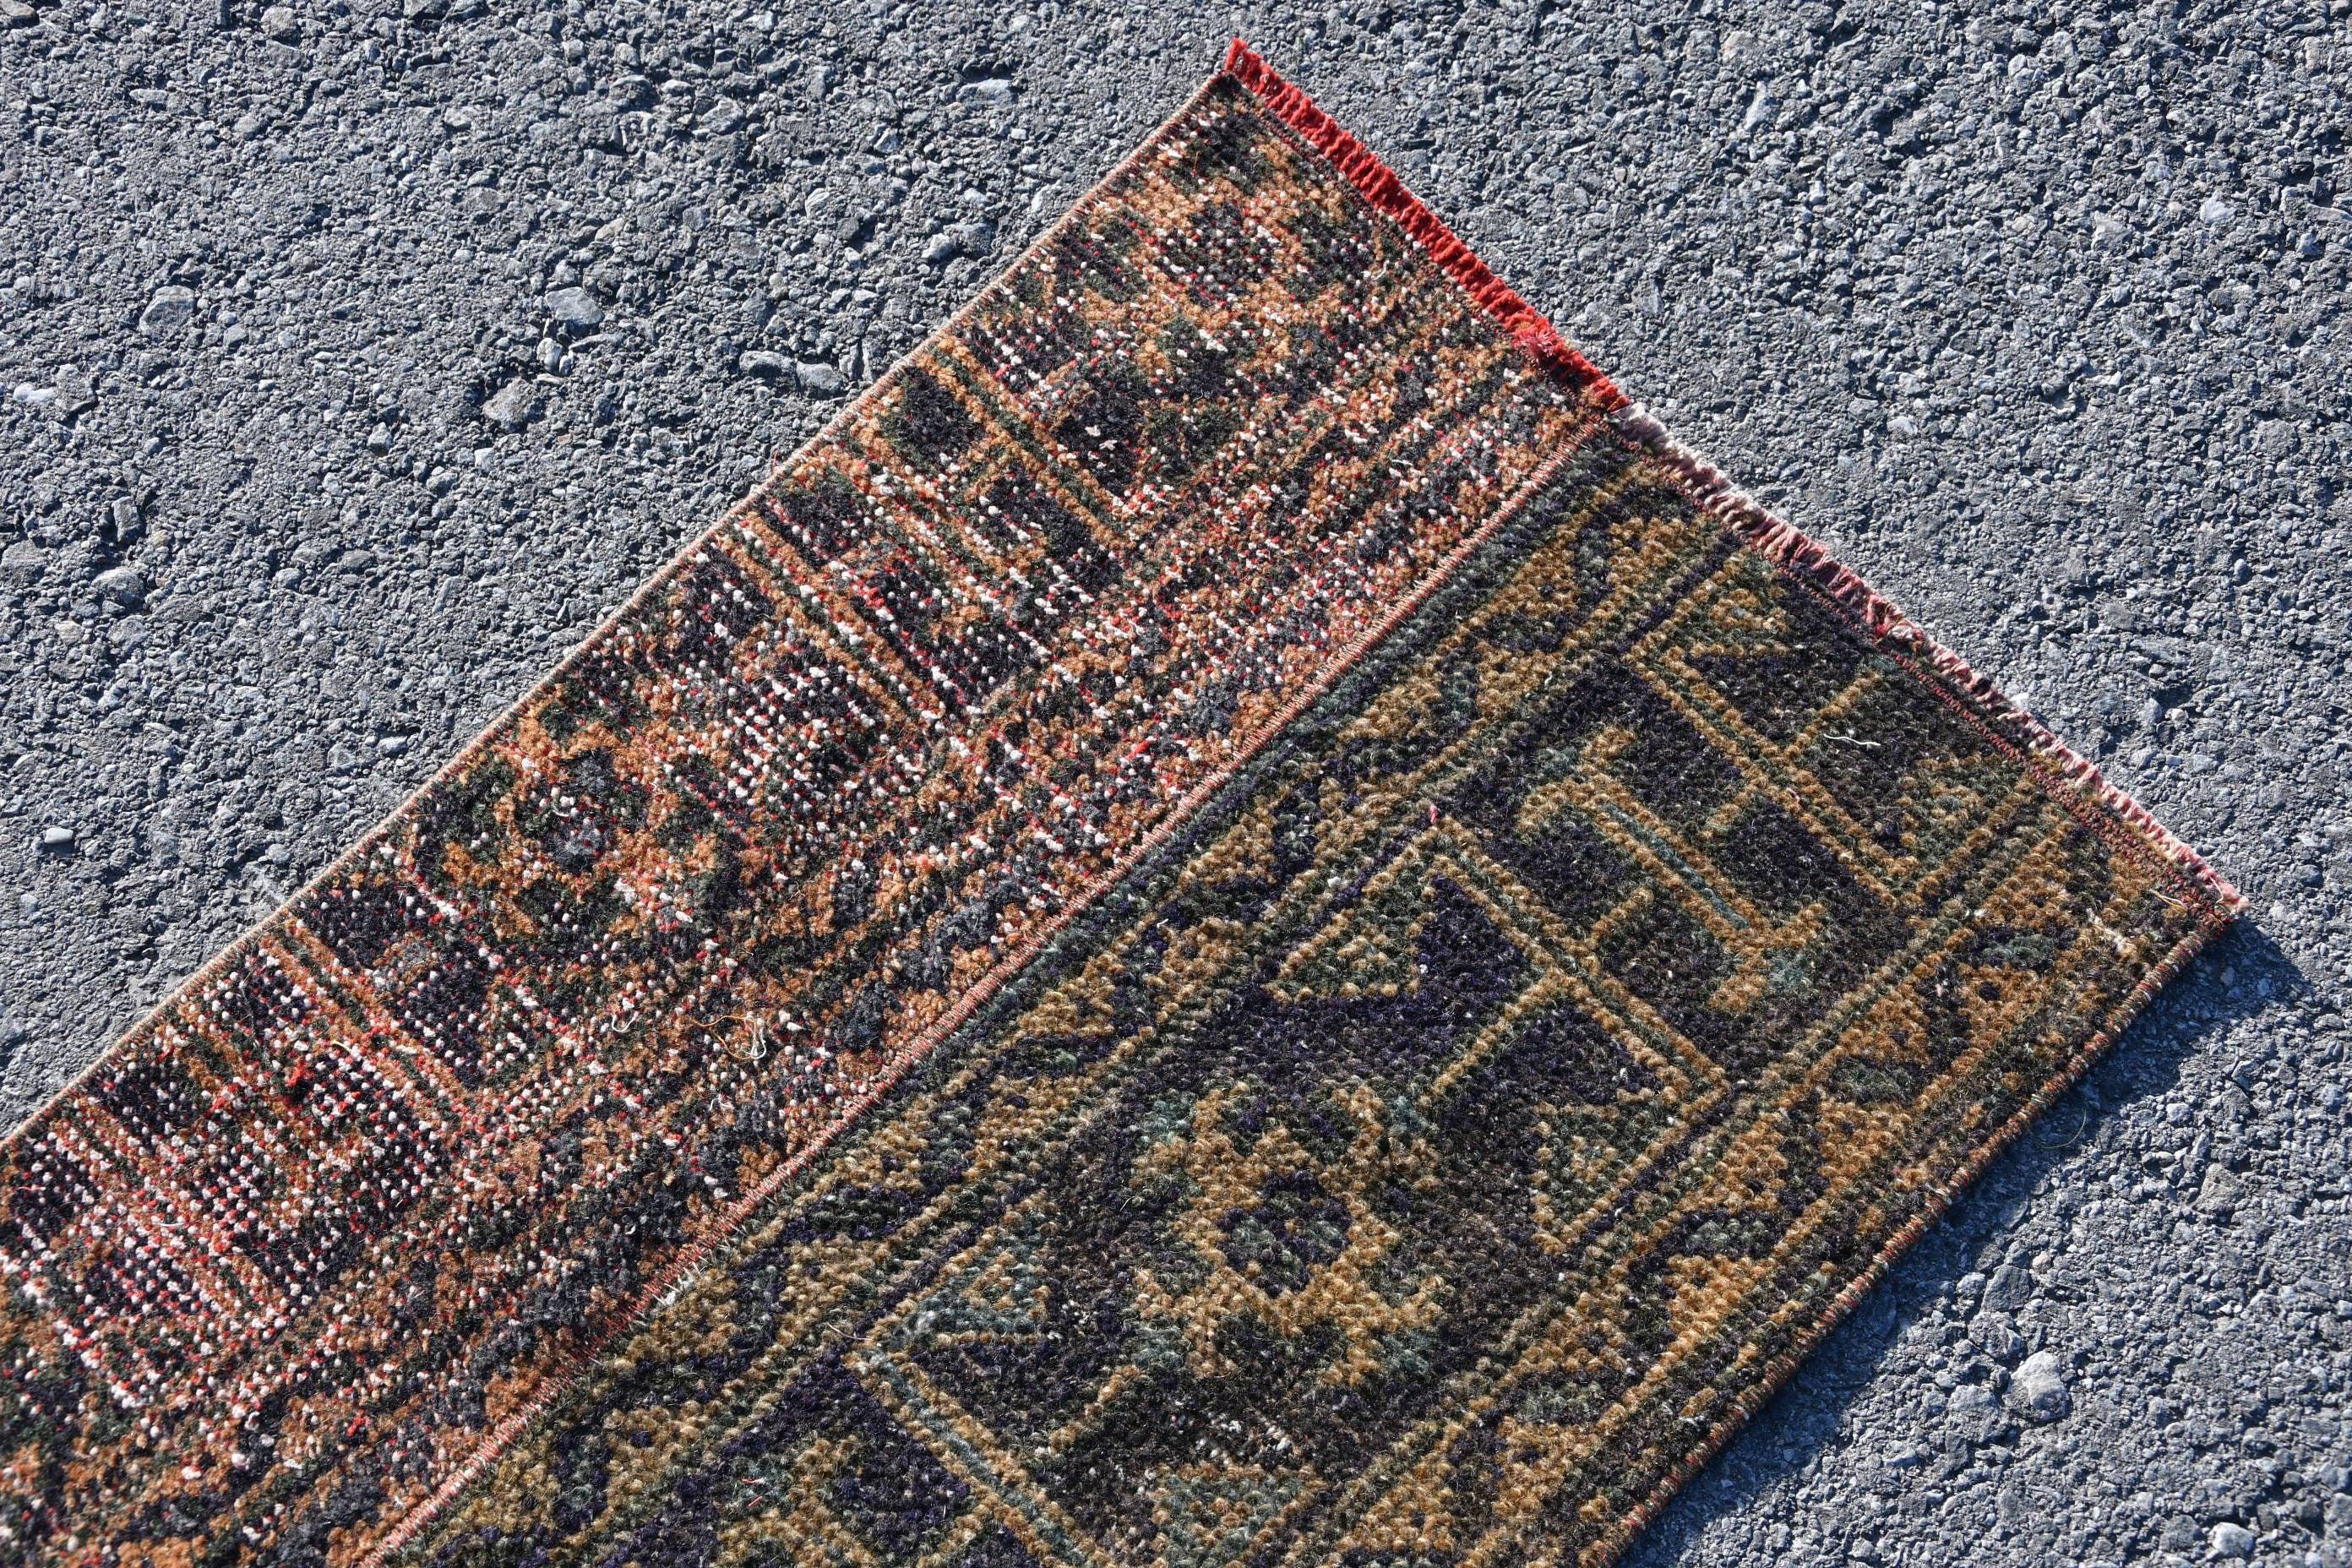 Vintage Rugs, Nursery Rugs, 1.5x3.6 ft Small Rug, Kitchen Rugs, Rugs for Bath, Car Mat Rug, Vintage Decor Rugs, Colorful Rug, Turkish Rug